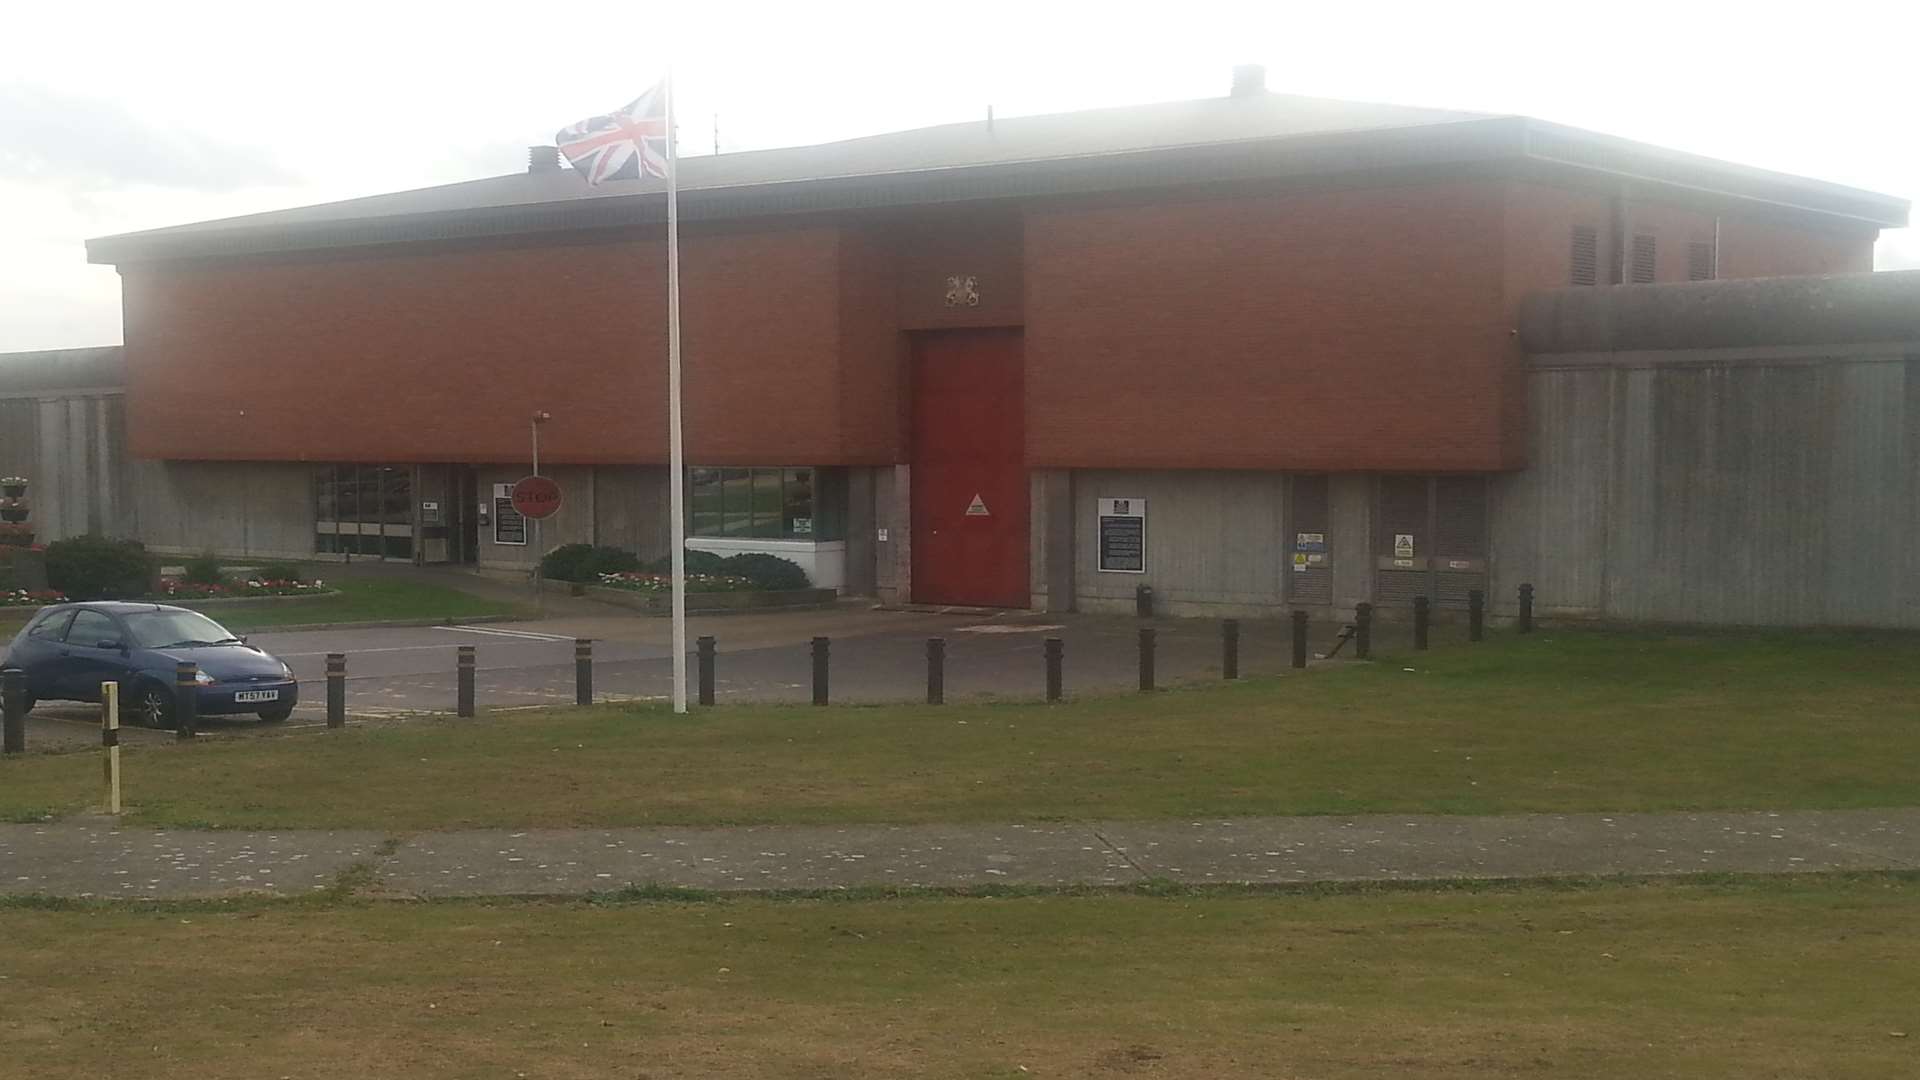 Swaleside prison in Eastchurch on the Isle of Sheppey